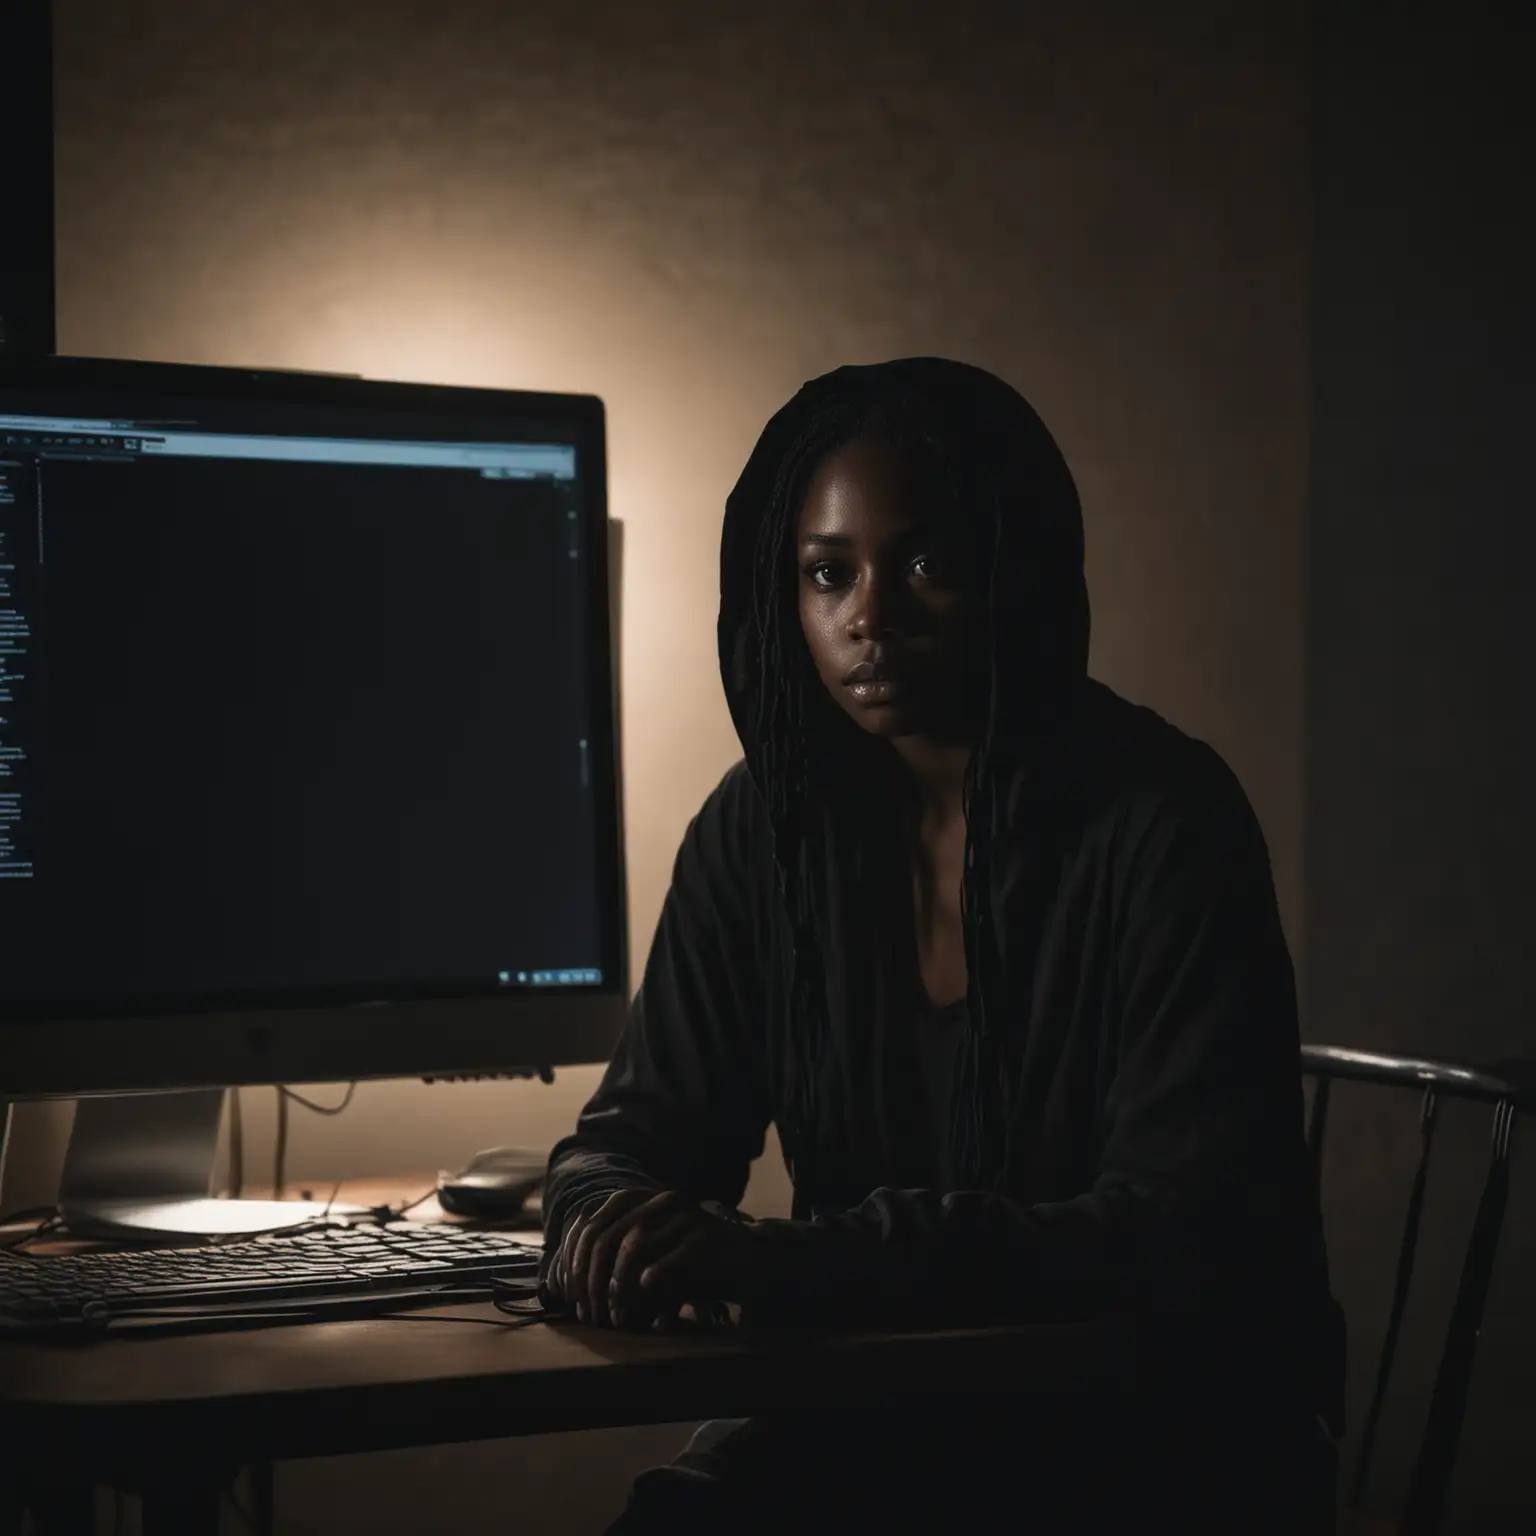 Enigmatic Black Woman Immersed in Darkness at Computer Screen